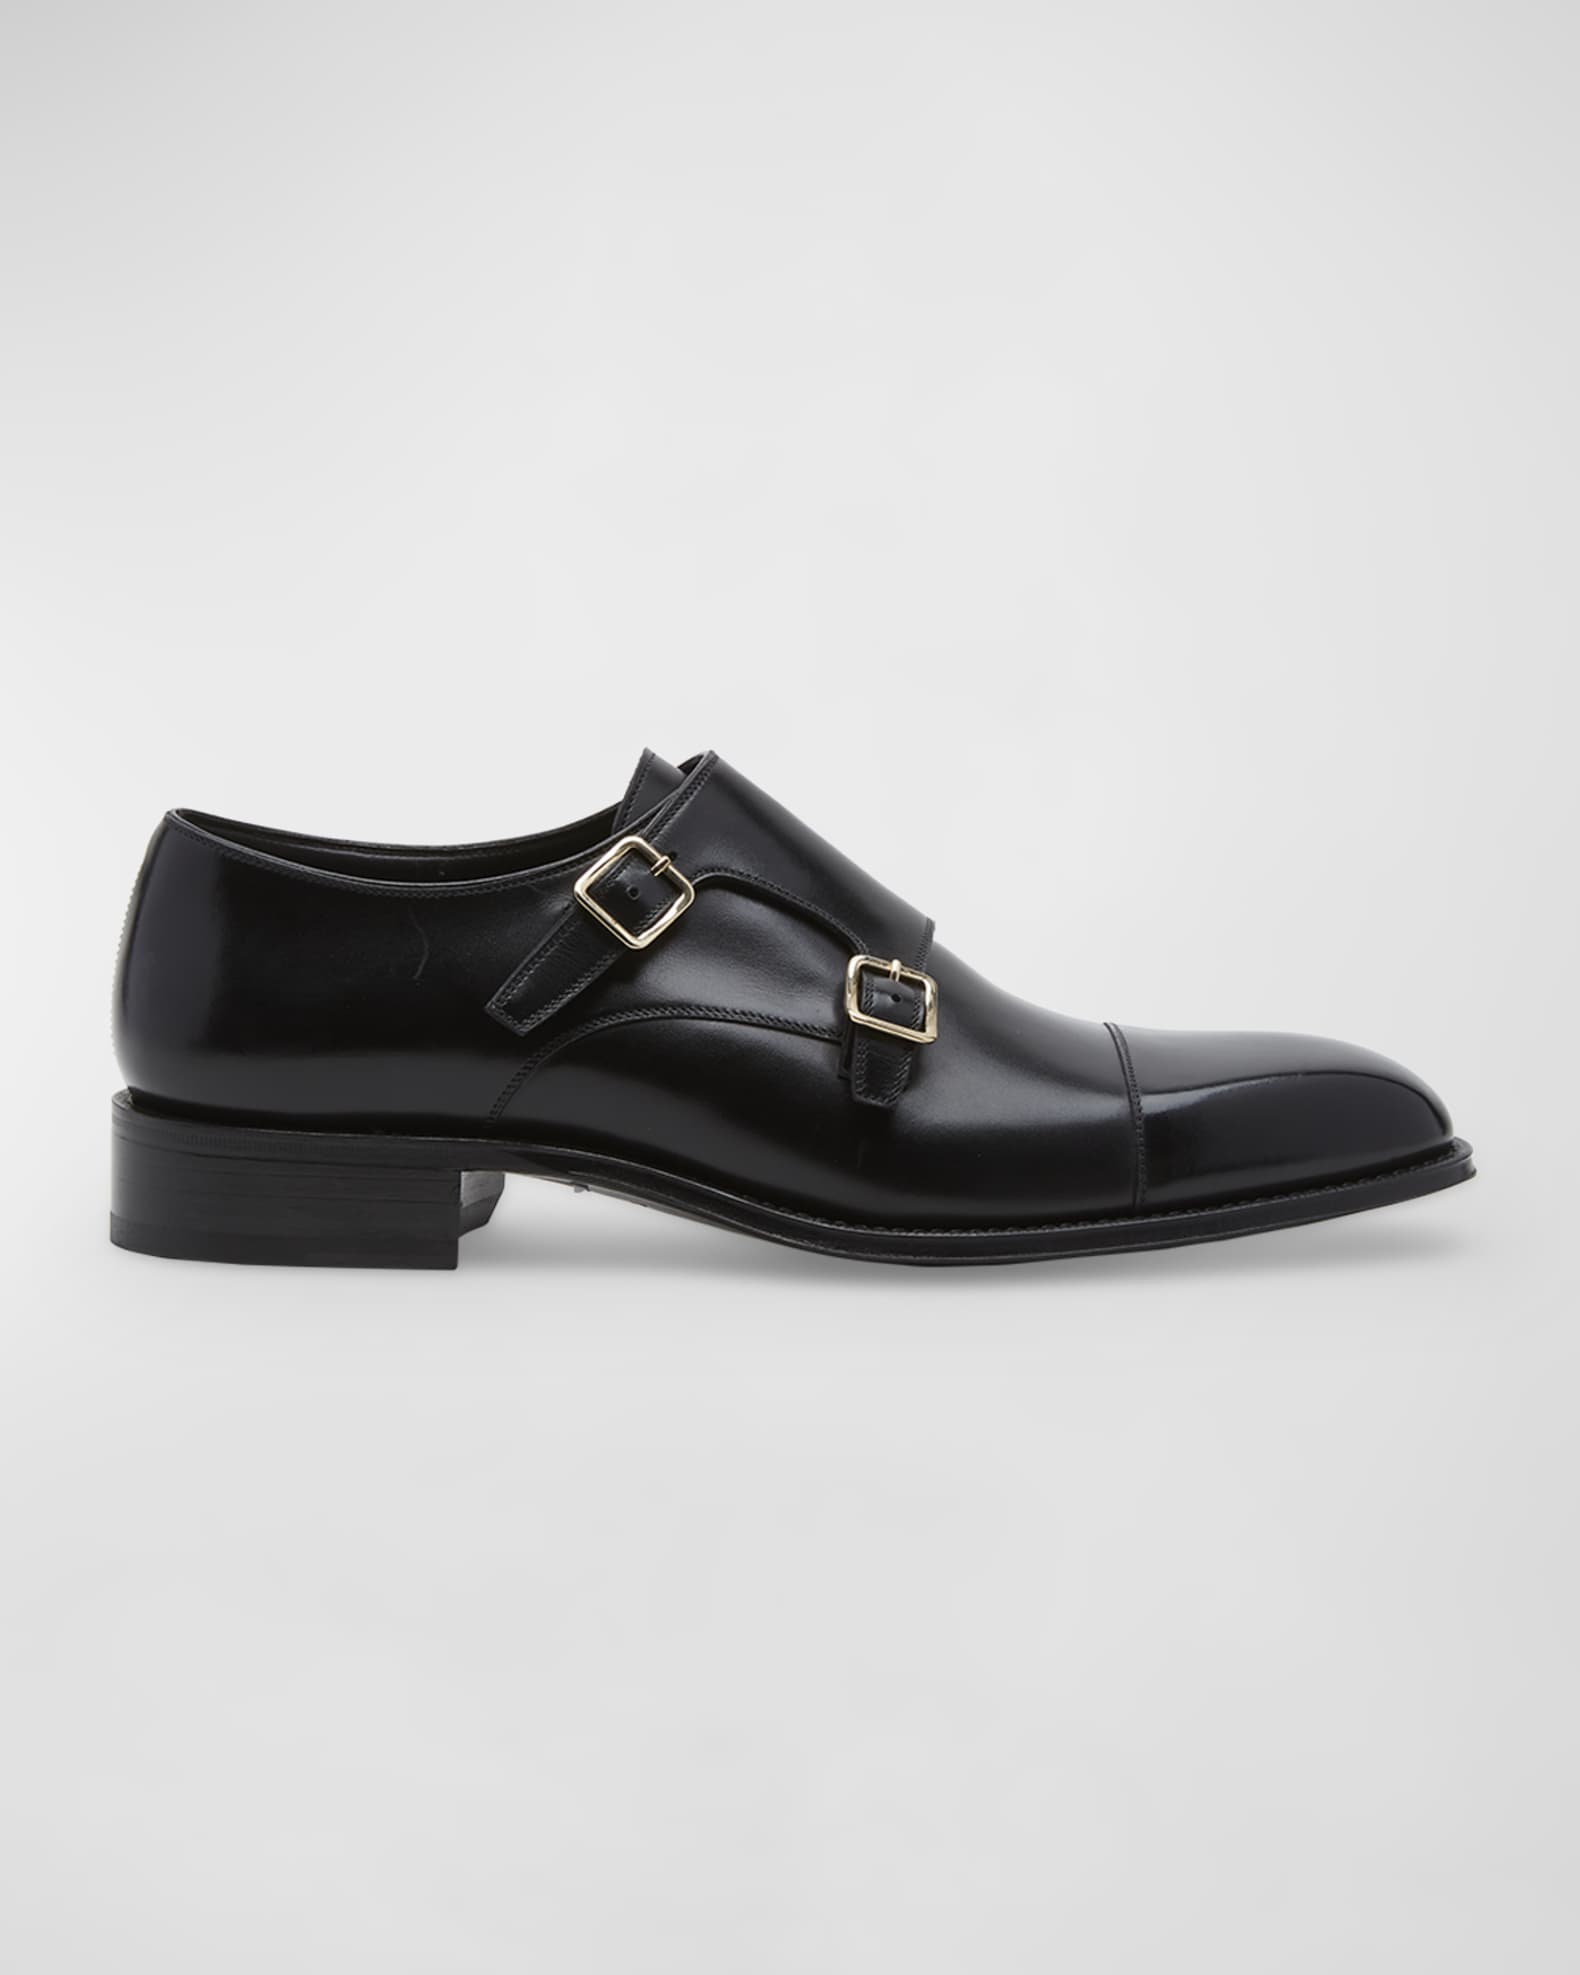 TOM FORD Men's Claydon Leather Double-Monk Strap Loafers | Neiman Marcus